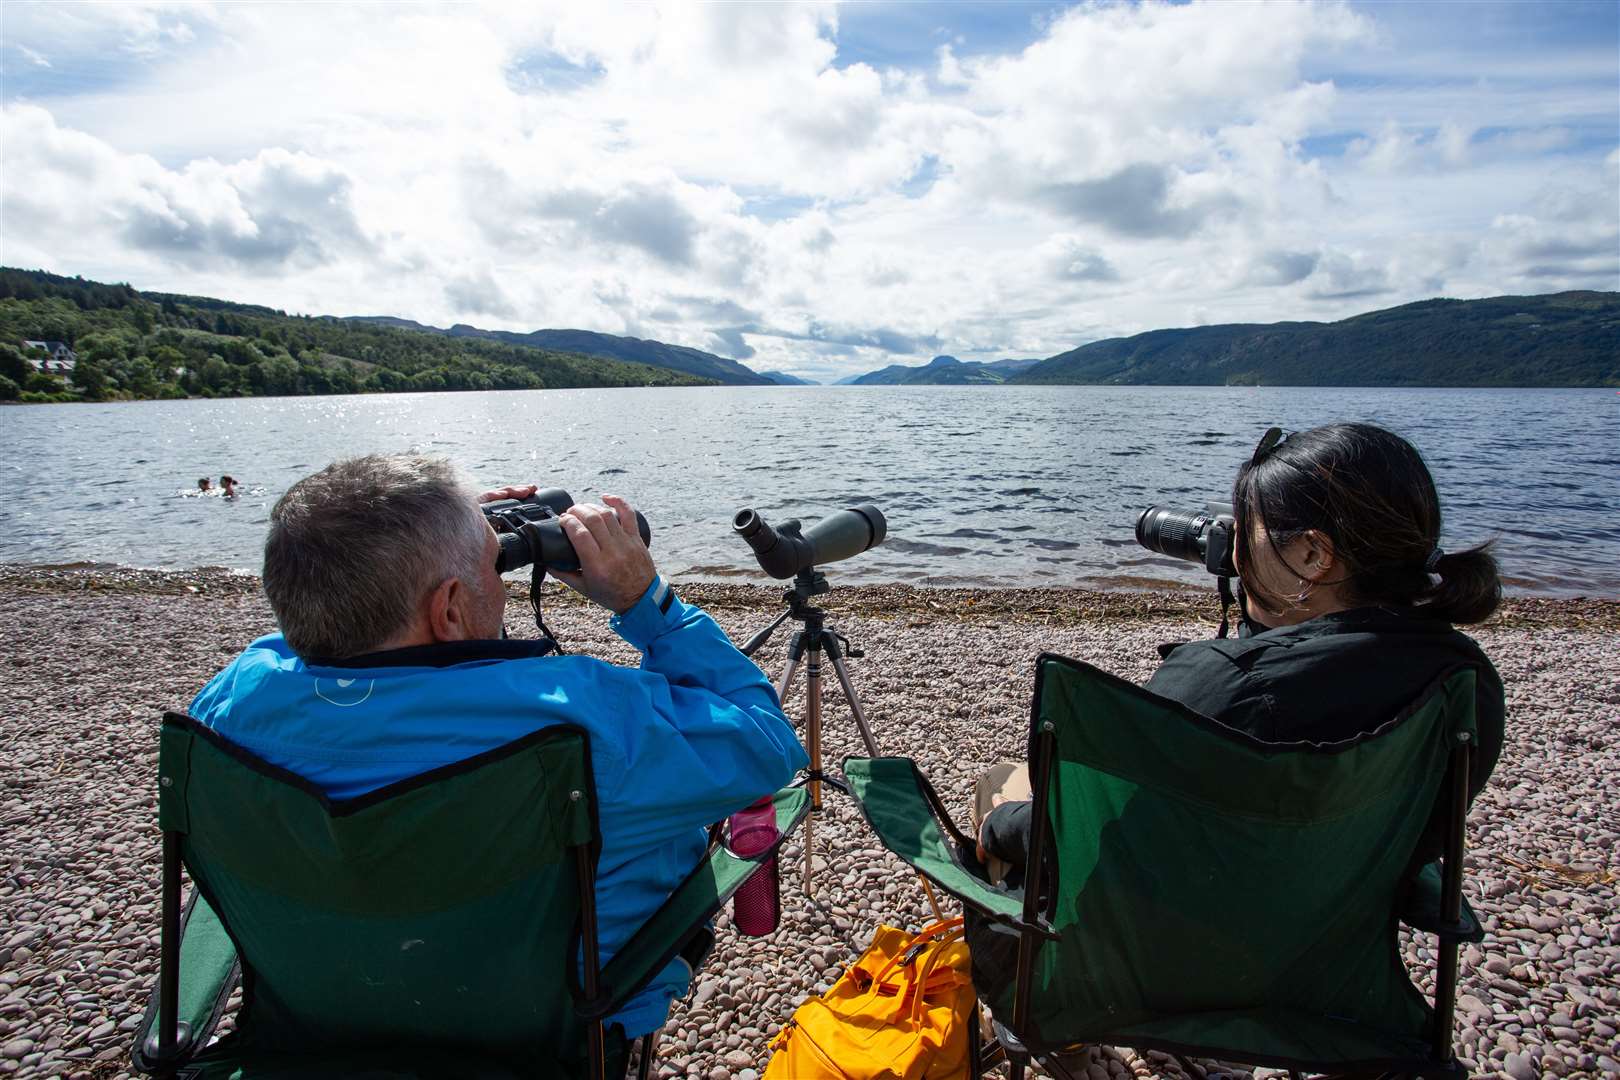 Nessie hunters take up their position for the surface search of Loch Ness.